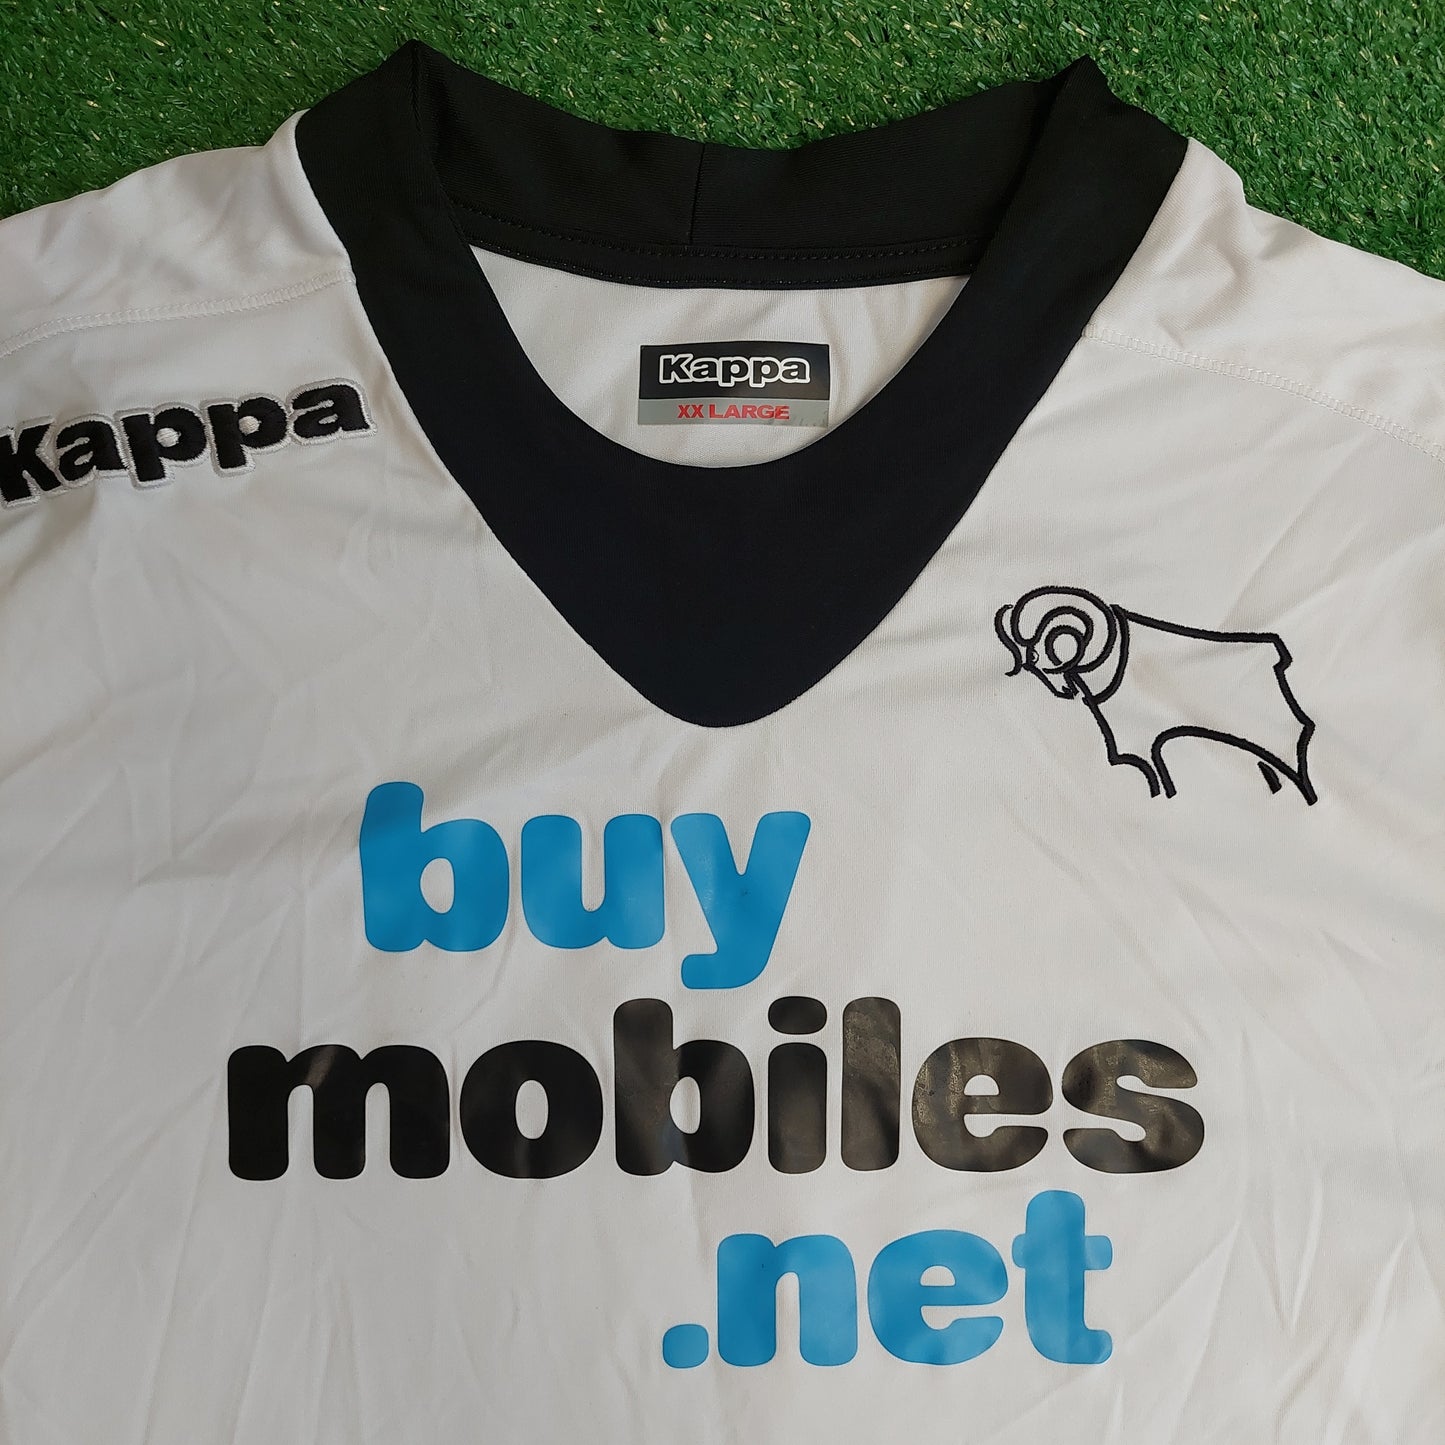 Derby County 2012/13 Home Shirt (Excellent) - Size XXL